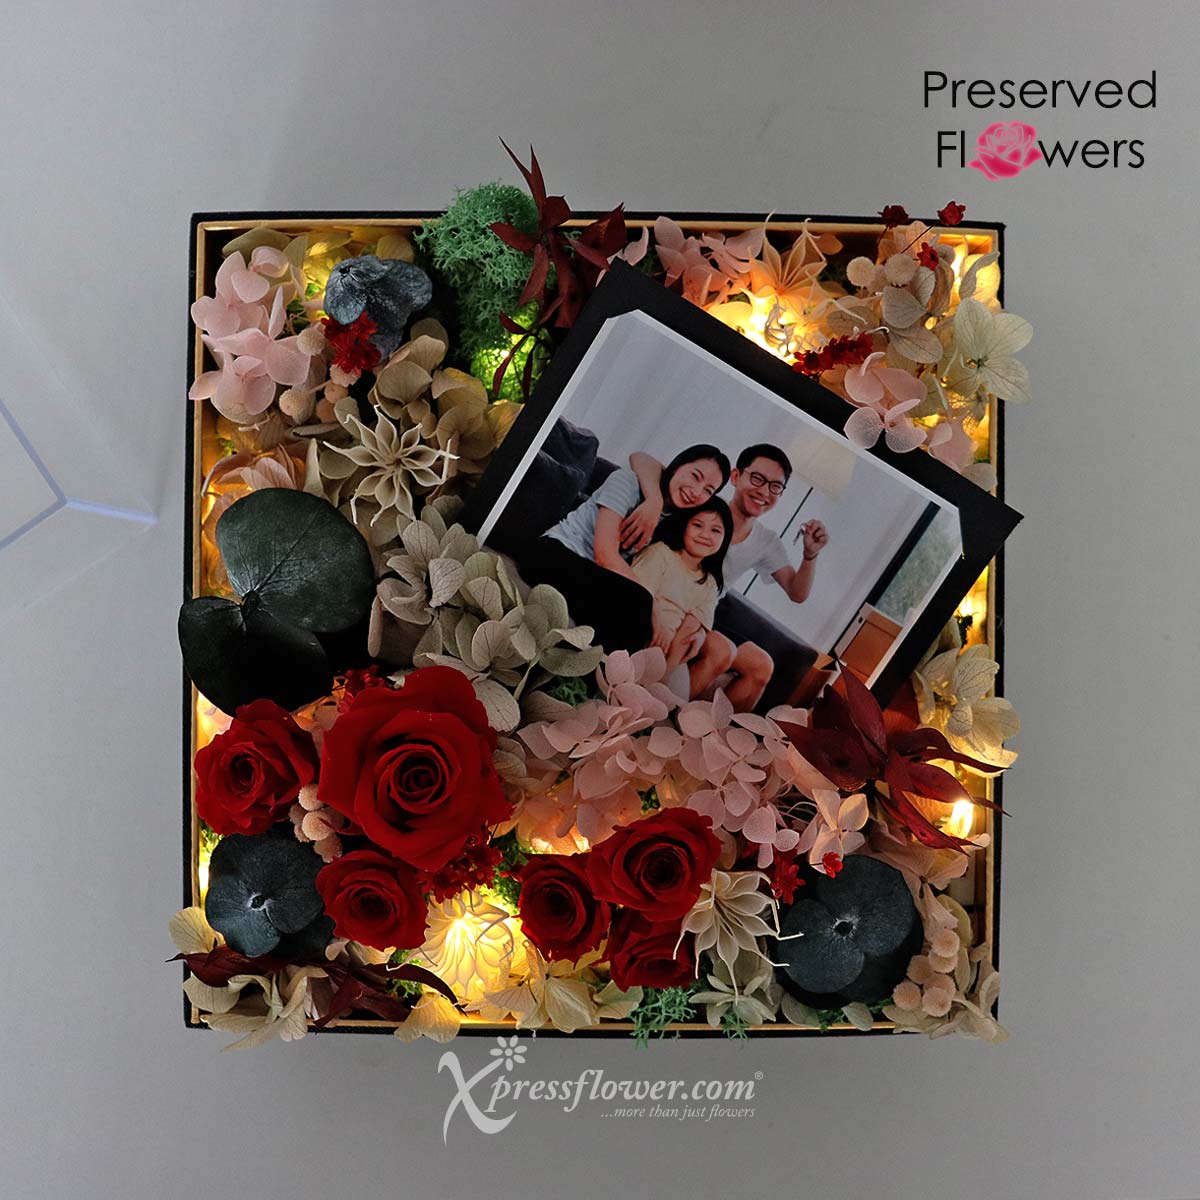 PR2131 Magical Petals (Preserved Flowers with Personalised Photo and LED Lights) 1c